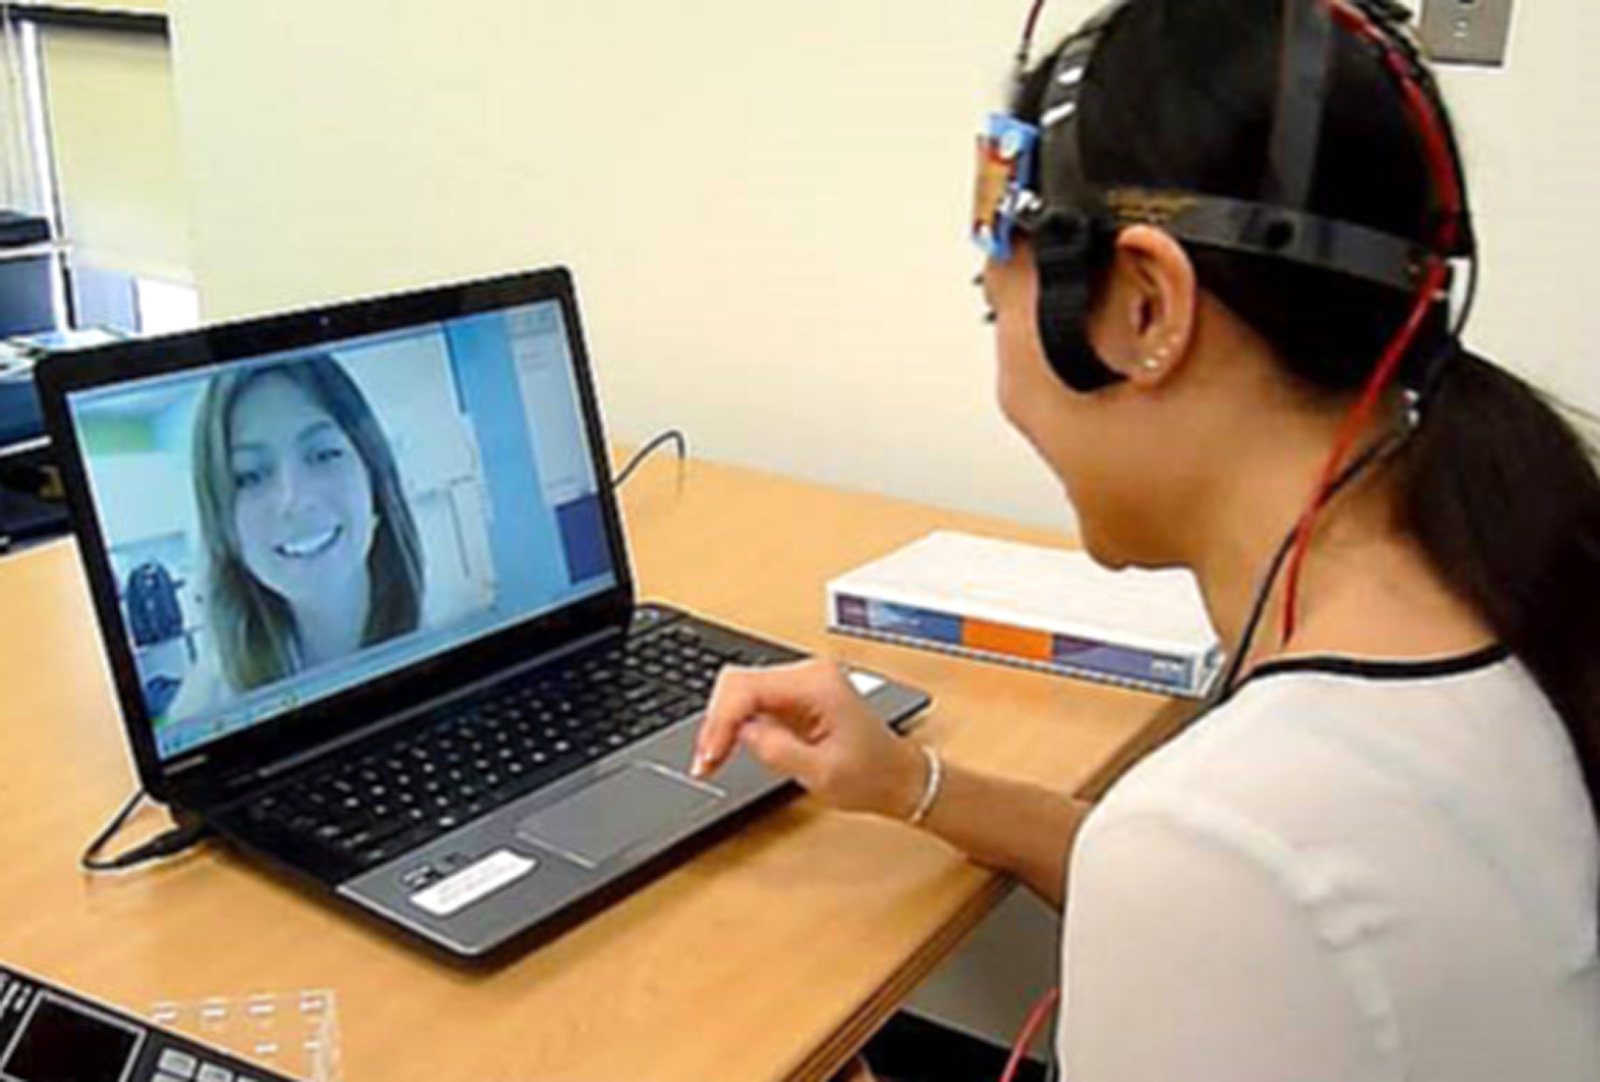 Patient completes home tDCS treatment in videoconference